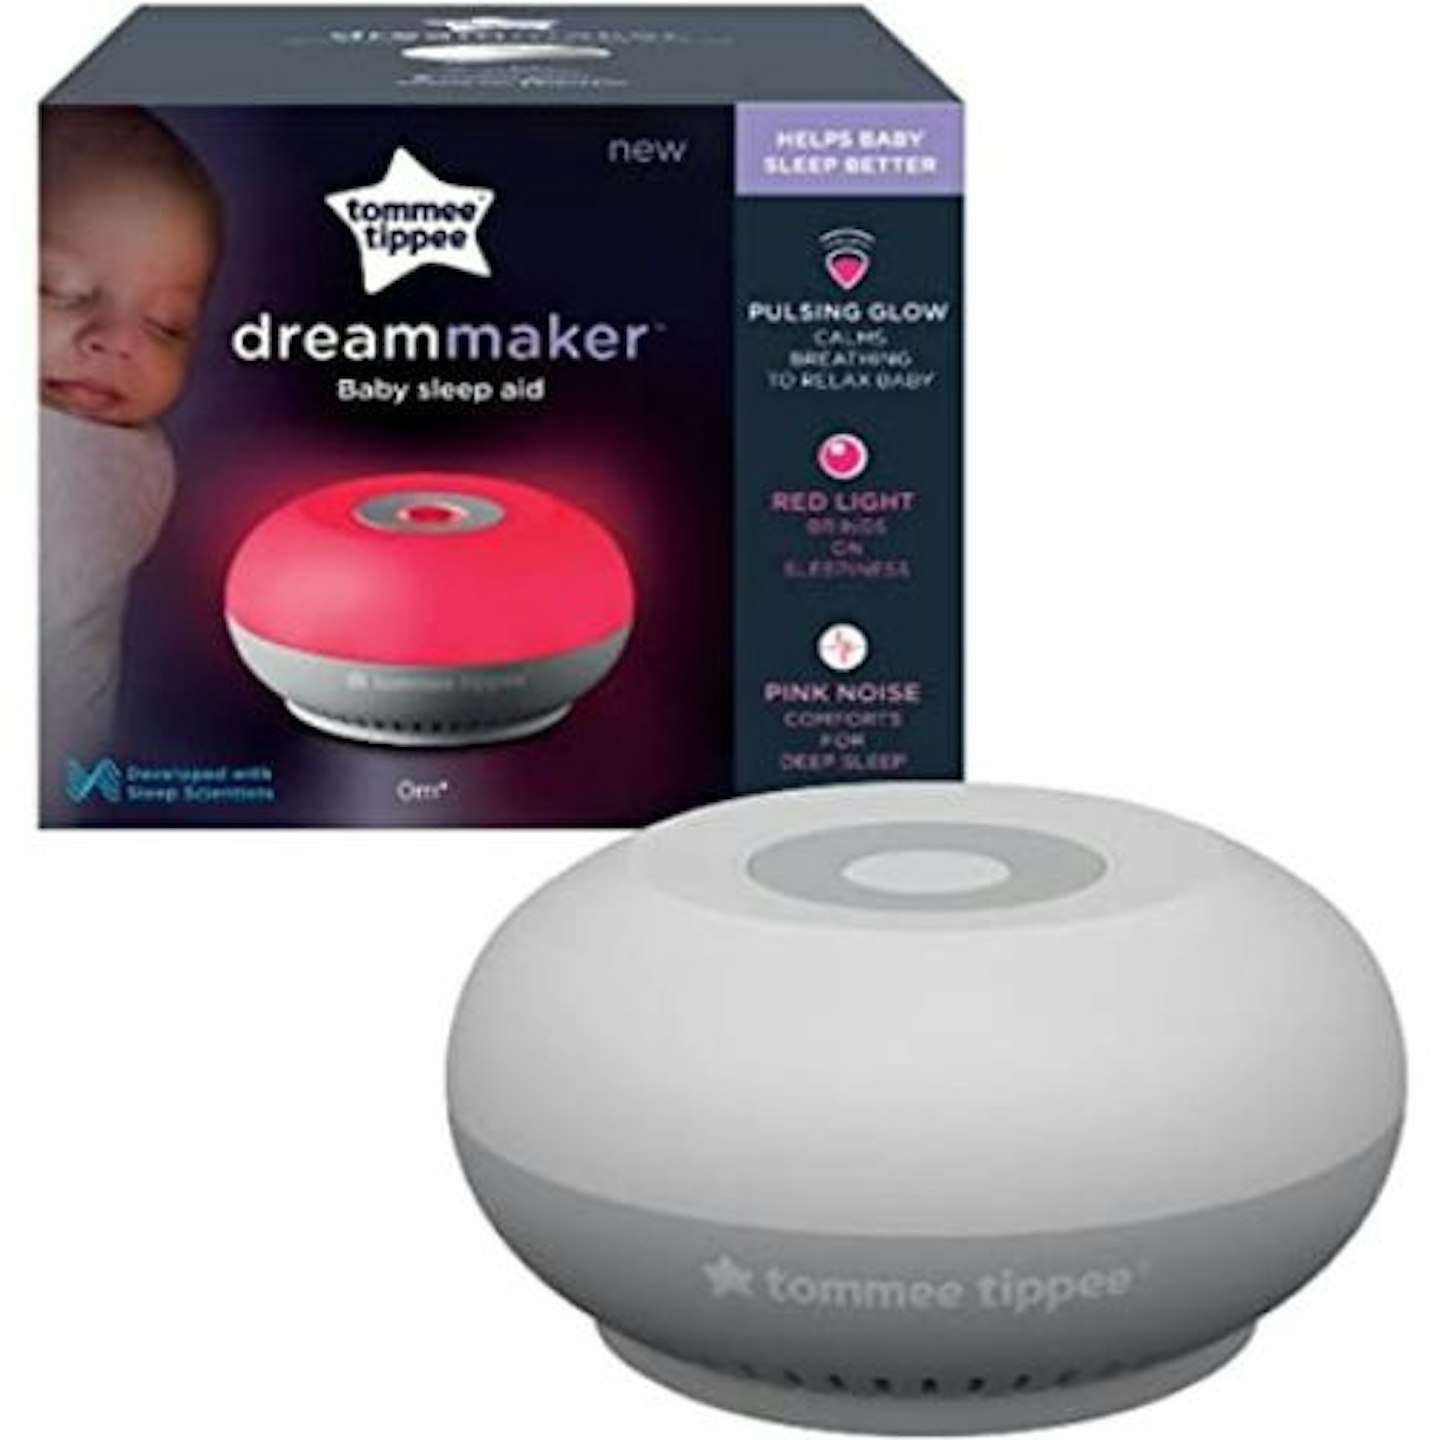 Dreammaker by Tommee Tippee - Baby shower gift